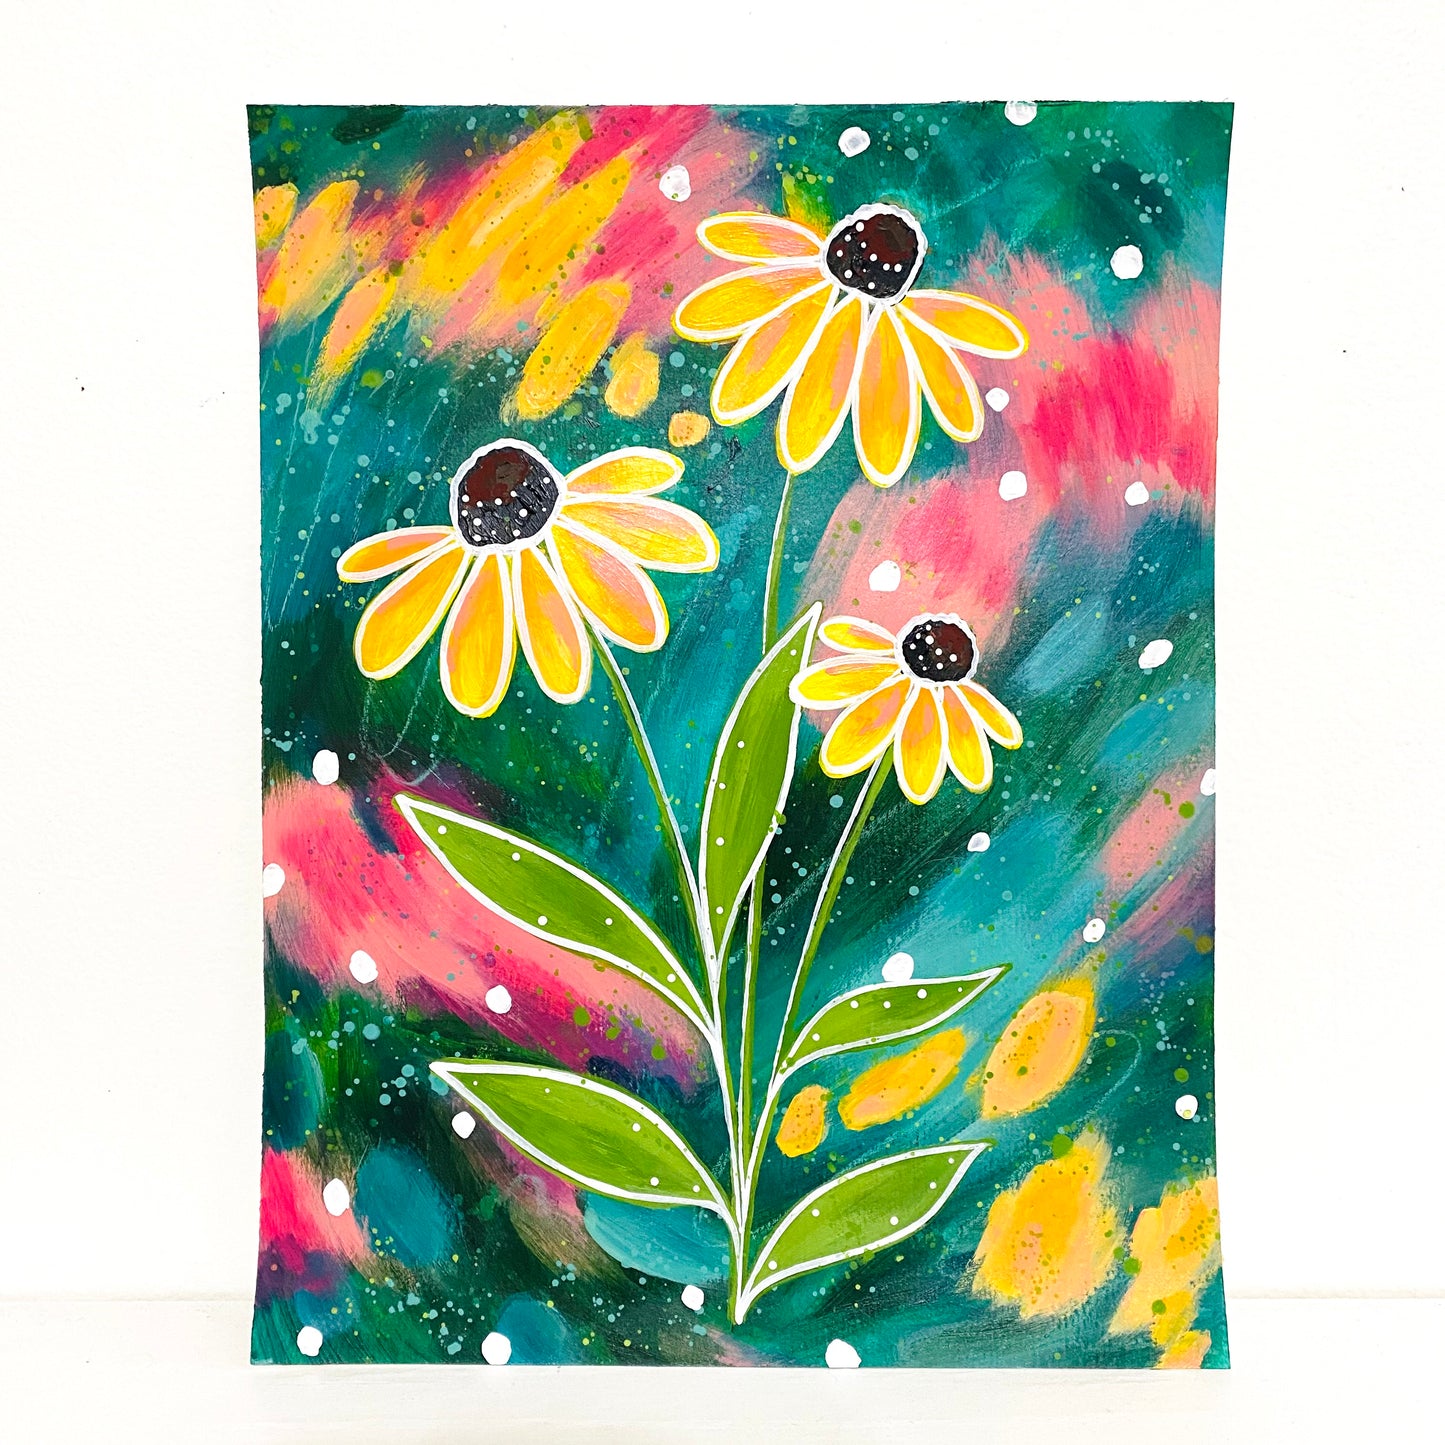 February Flowers Day 26 Black-Eyed Susan 8.5x11 inch original painting